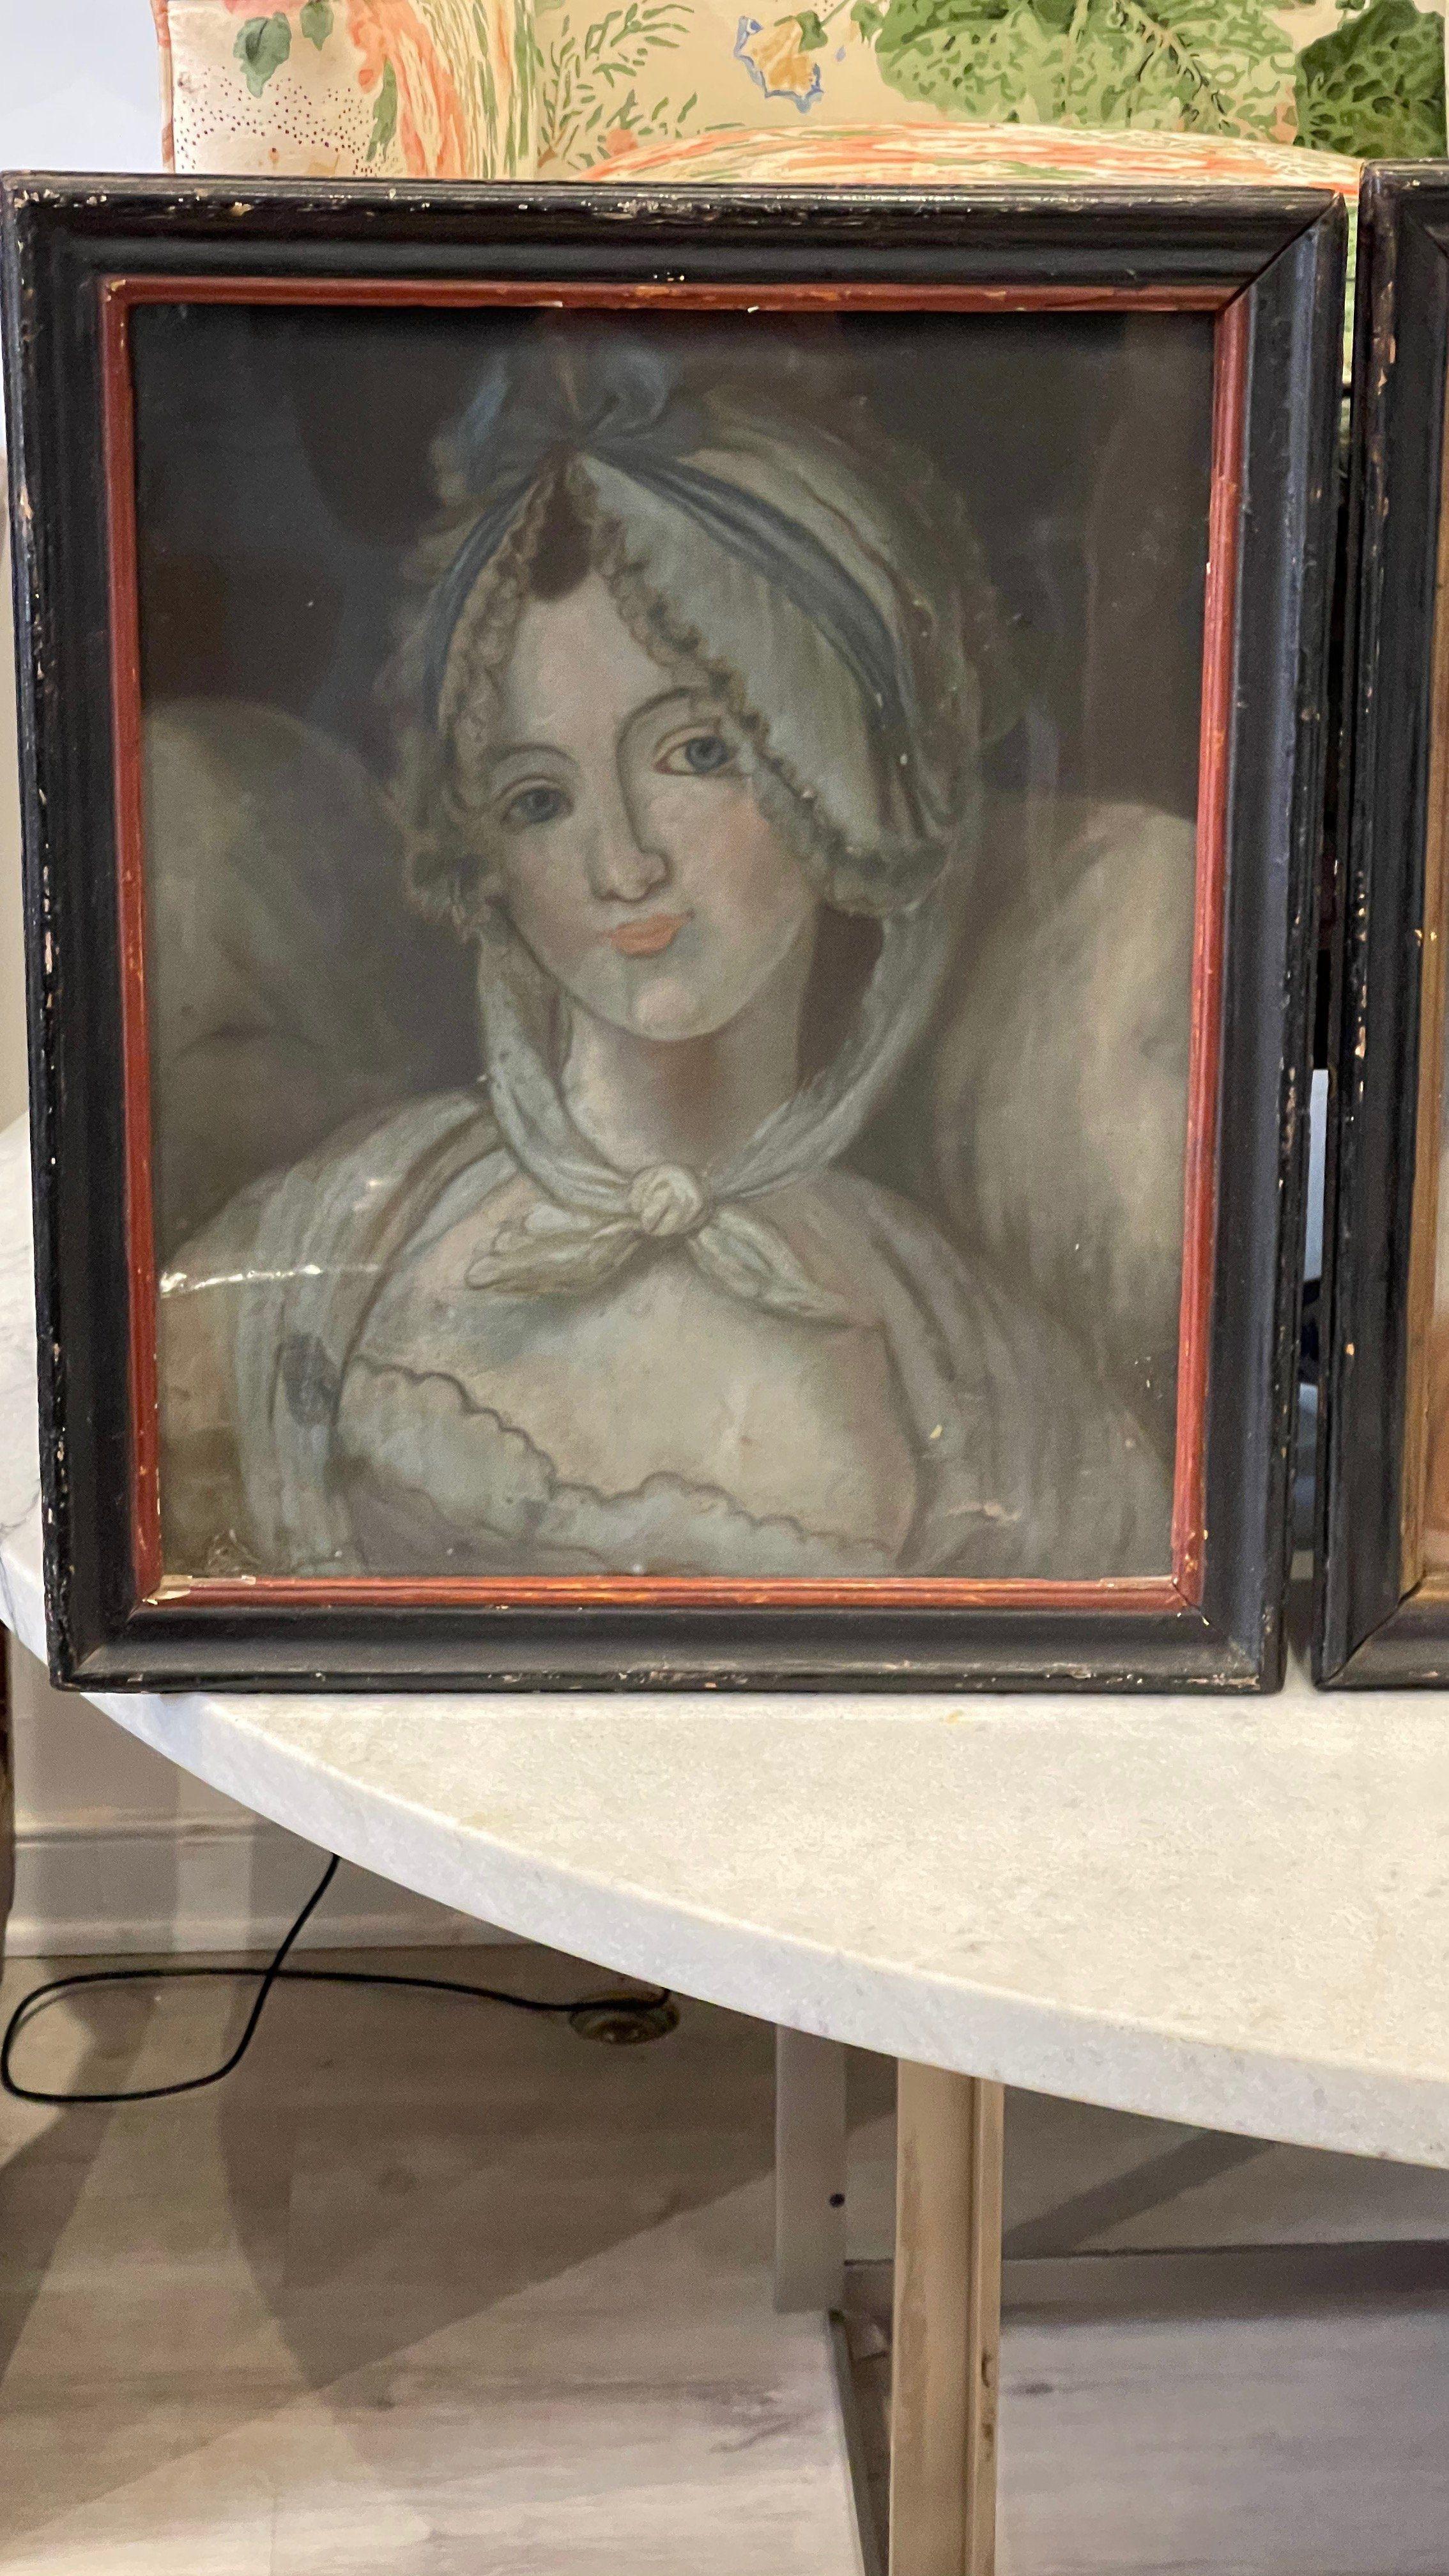 Three enchanting 18th century French oil-pastel portraits of women, two with their pets. All by the same hand, though the artist is unknown. In early frames behind period wavy glass.